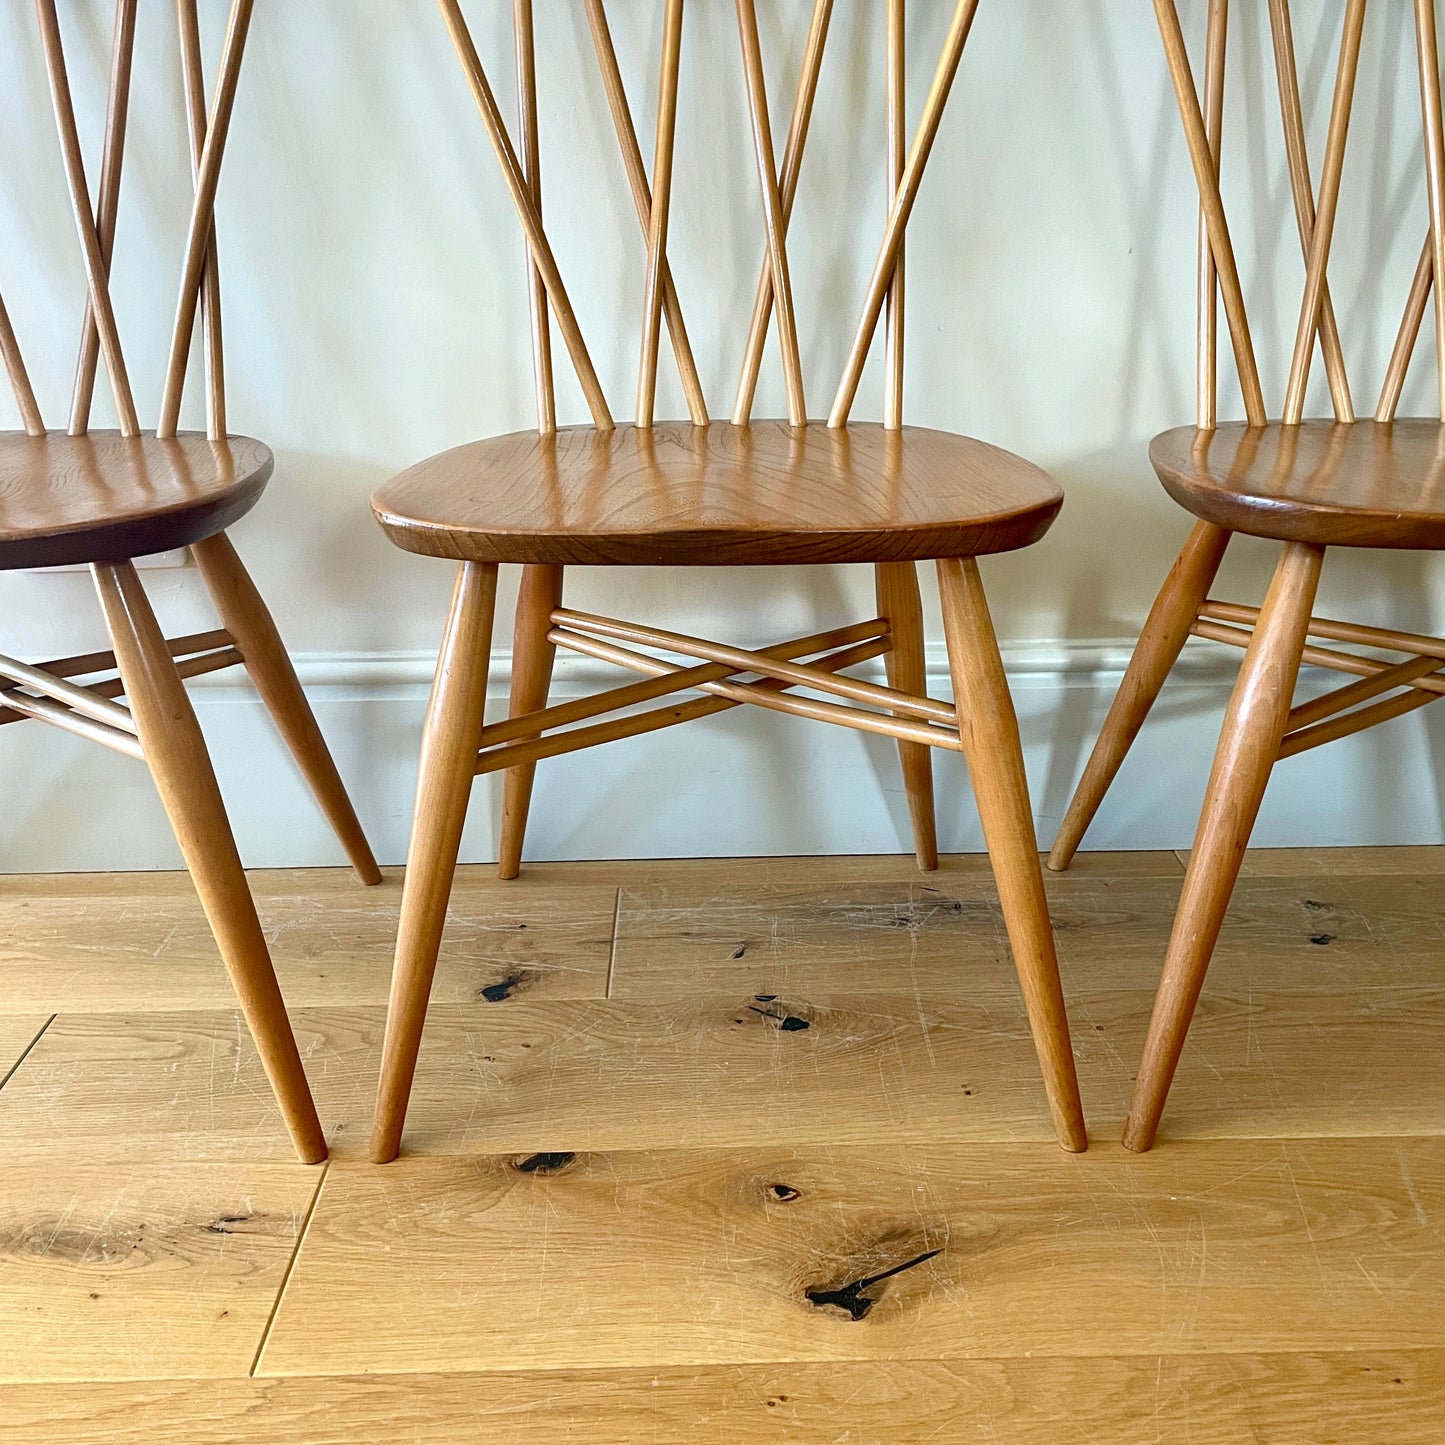 4 x Ercol Windsor Candlestick Dining chairs